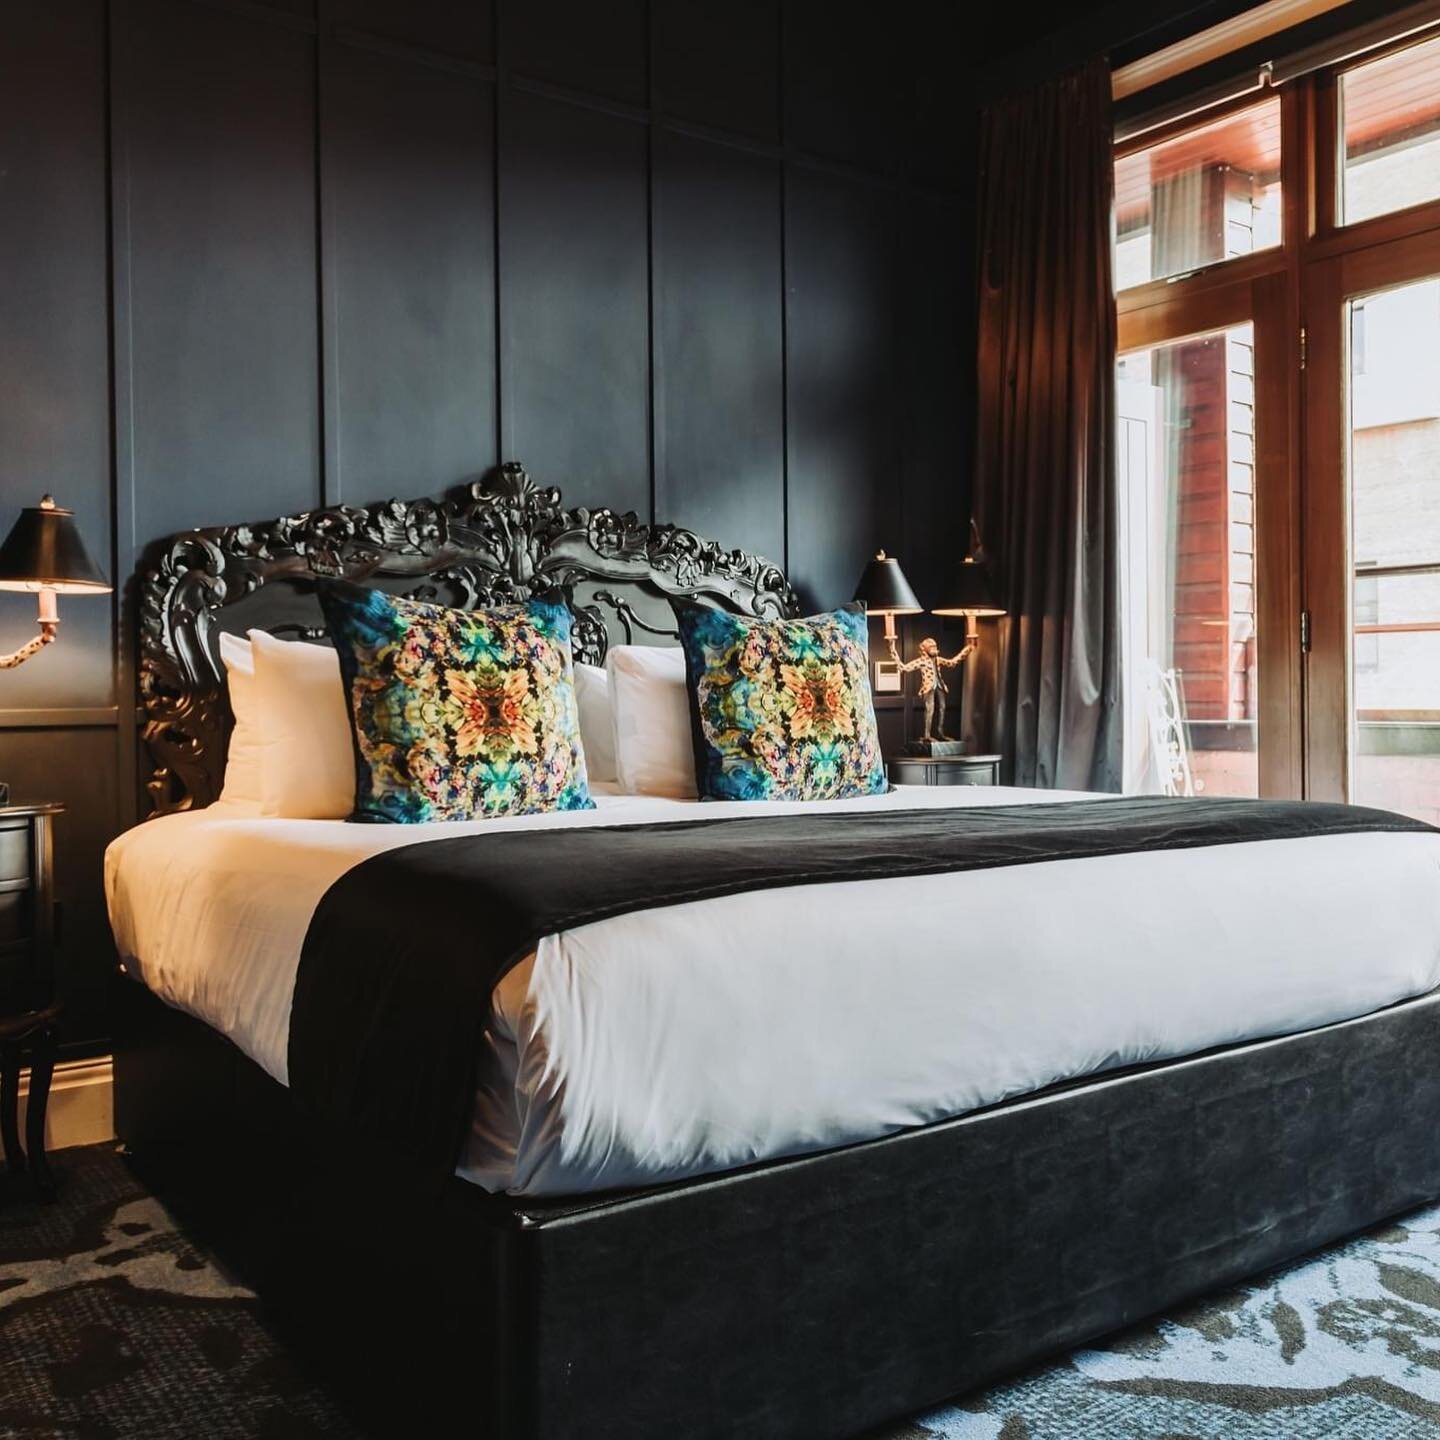 'Treat yourself to a luxurious stay in the heart of the Canal street, where every detail is designed to exceed your expectations for a truly 'luxurious; stay ✨🛏

Book direct for the best rates. 
📲 www.velvetmanchester.com

#velvet #hotelgoals #bedr